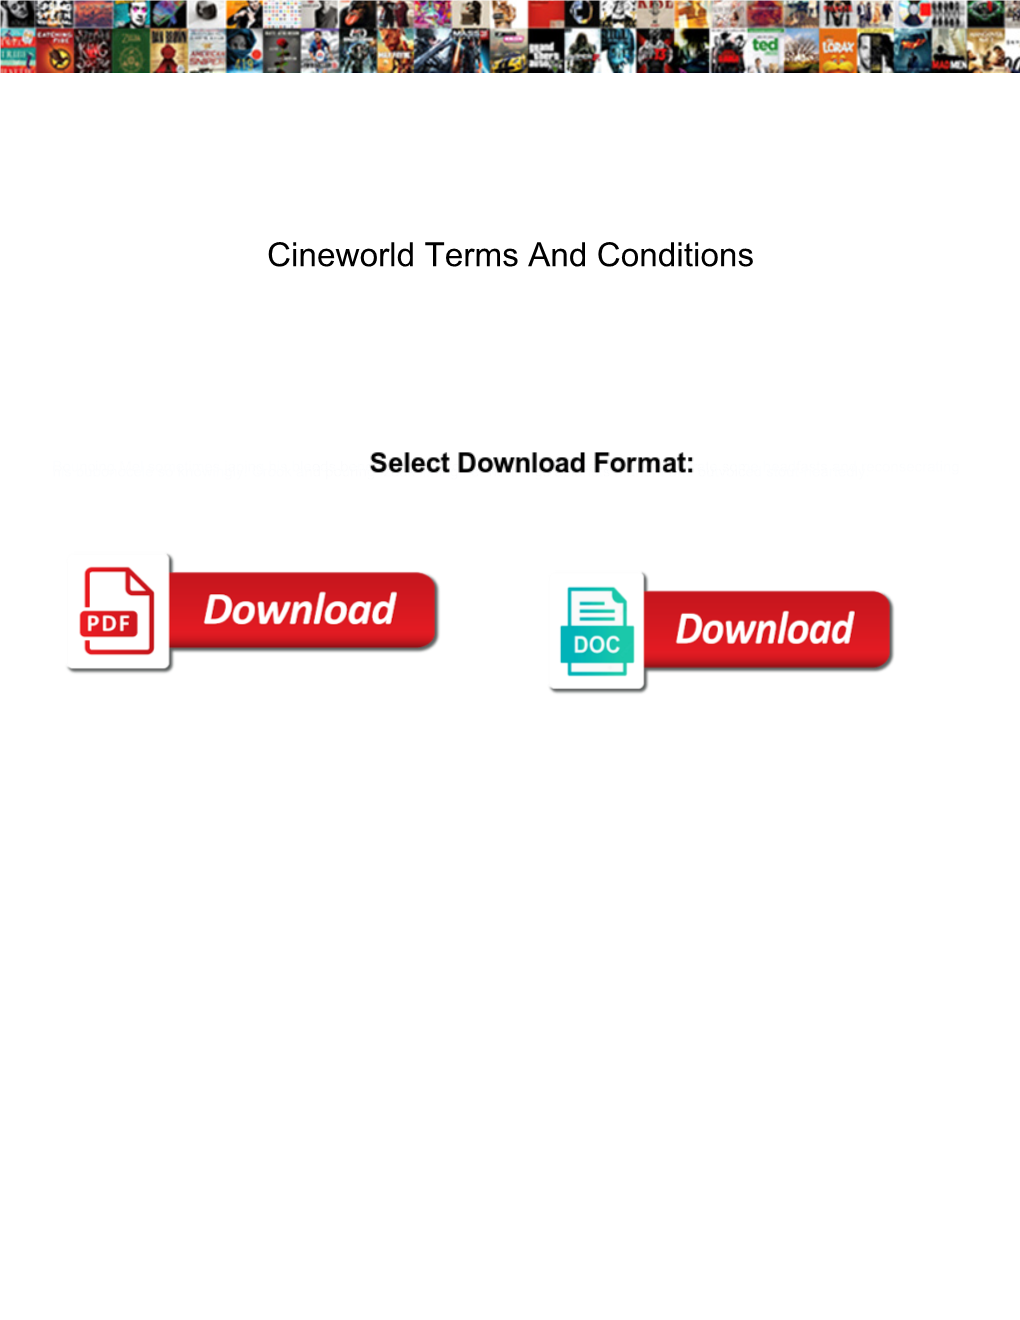 Cineworld Terms and Conditions